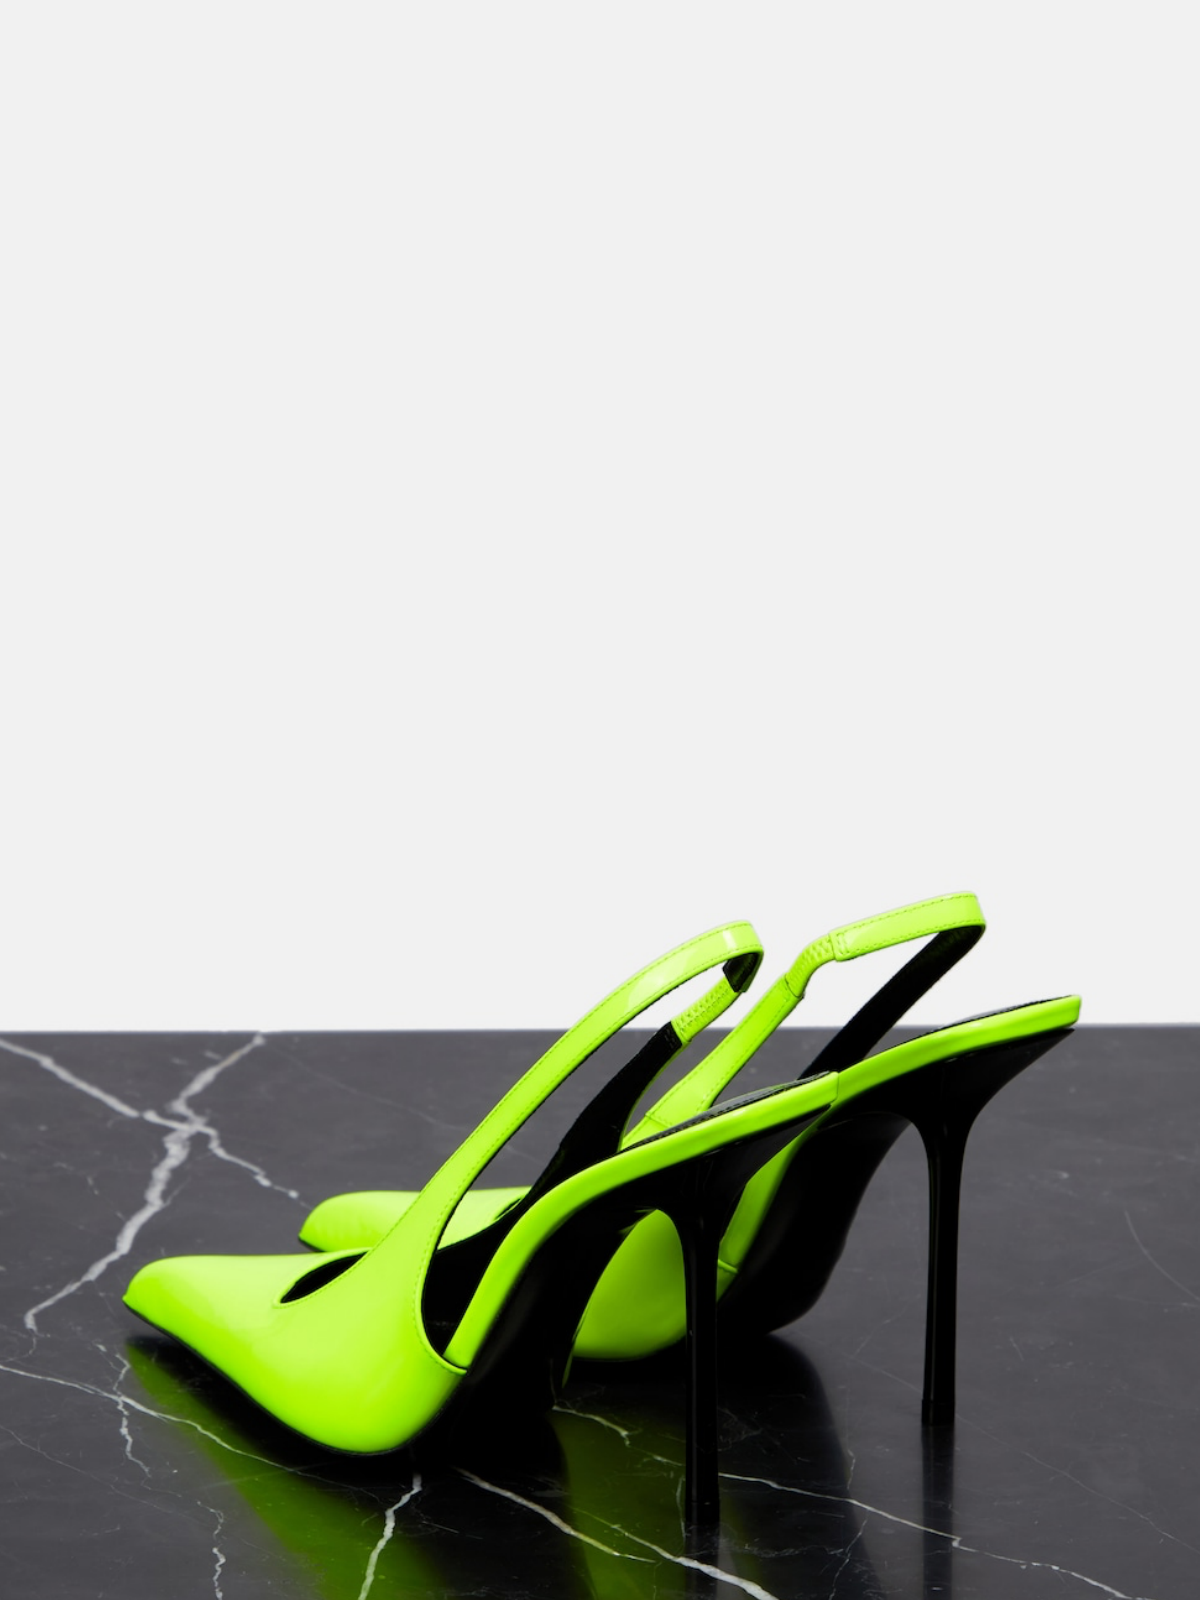 Patent Chartreuse Green Pointy Slingback Stiletto Pumps with Buckled Strap